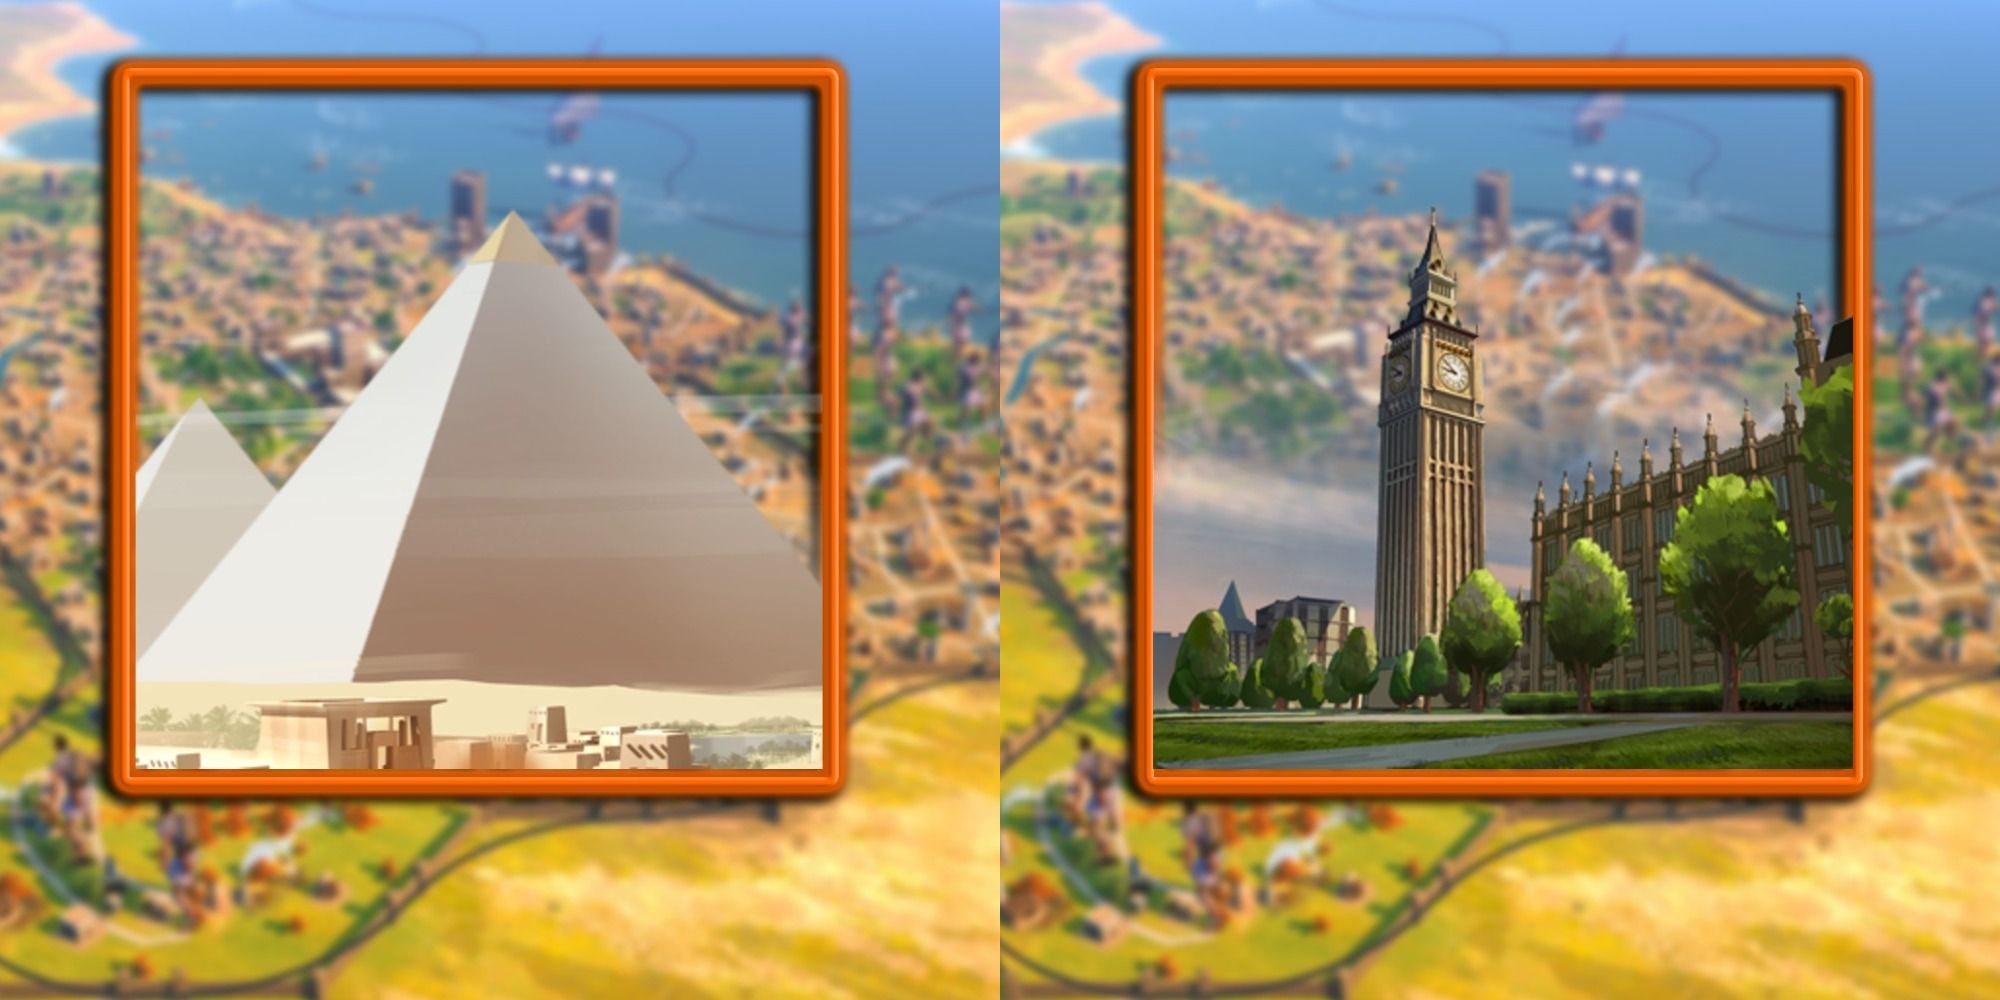 pyramids and big ben in humankind